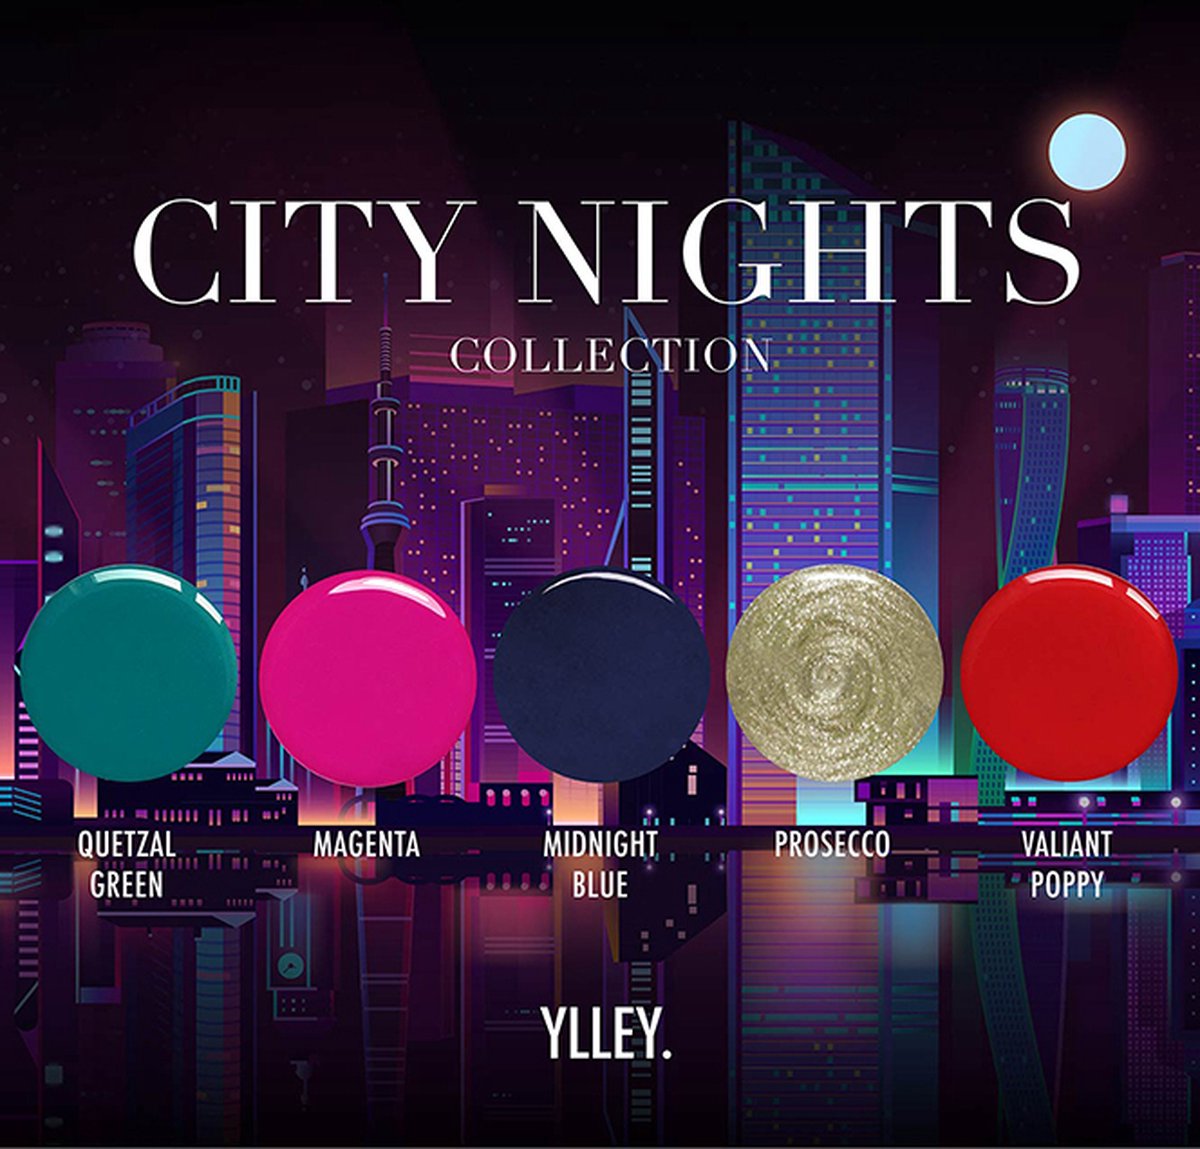 YLLEY - City Nights collection - Gellak - Manicure - Topcoat - Base Coat - Red - Blue - Gold - Green - Pink gellack